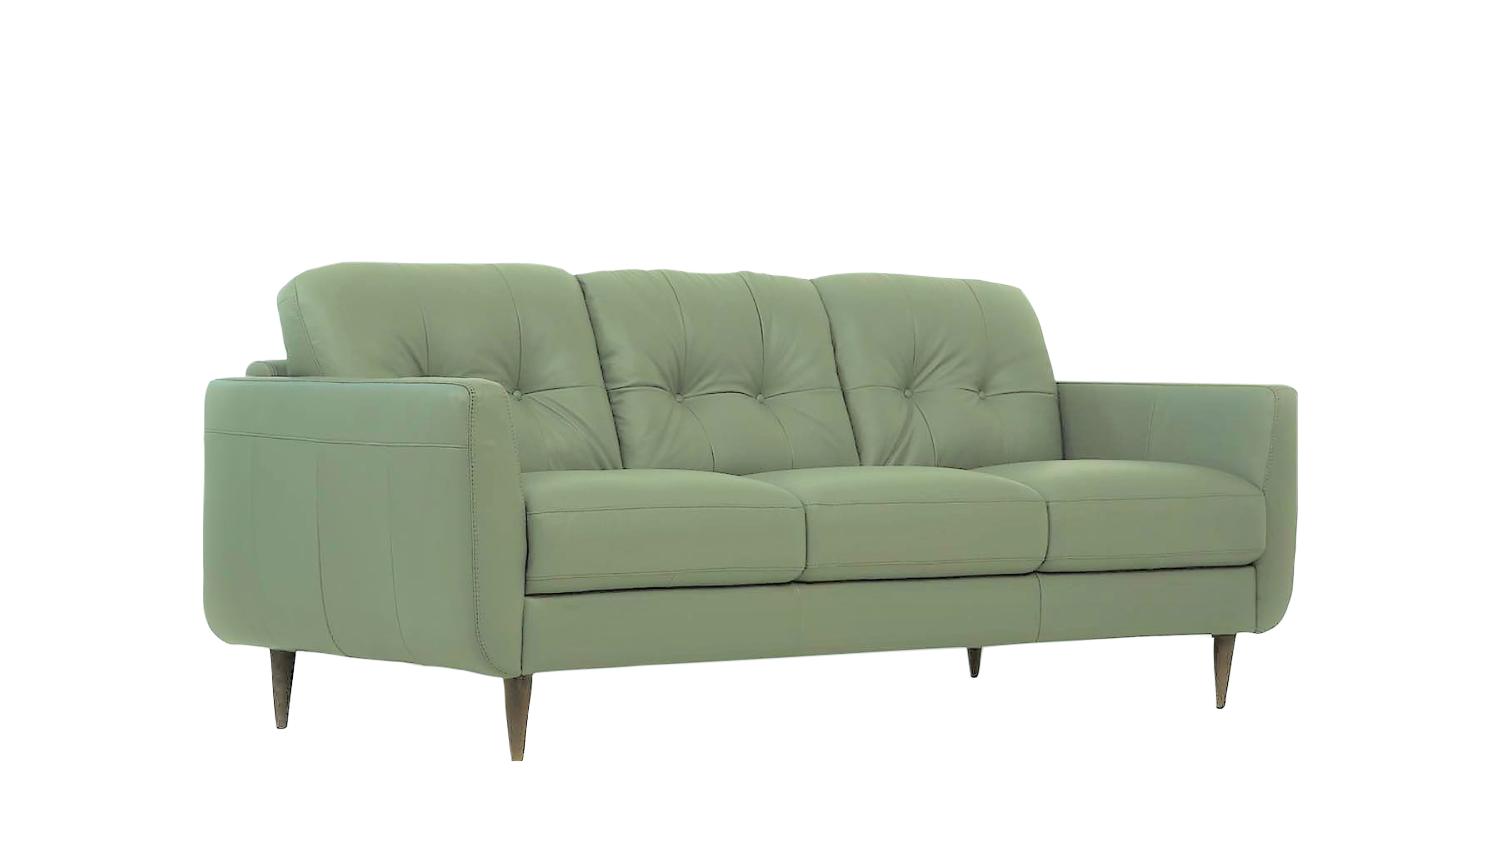 Transitional Sofa Radwan 54960 in Spring green Leather